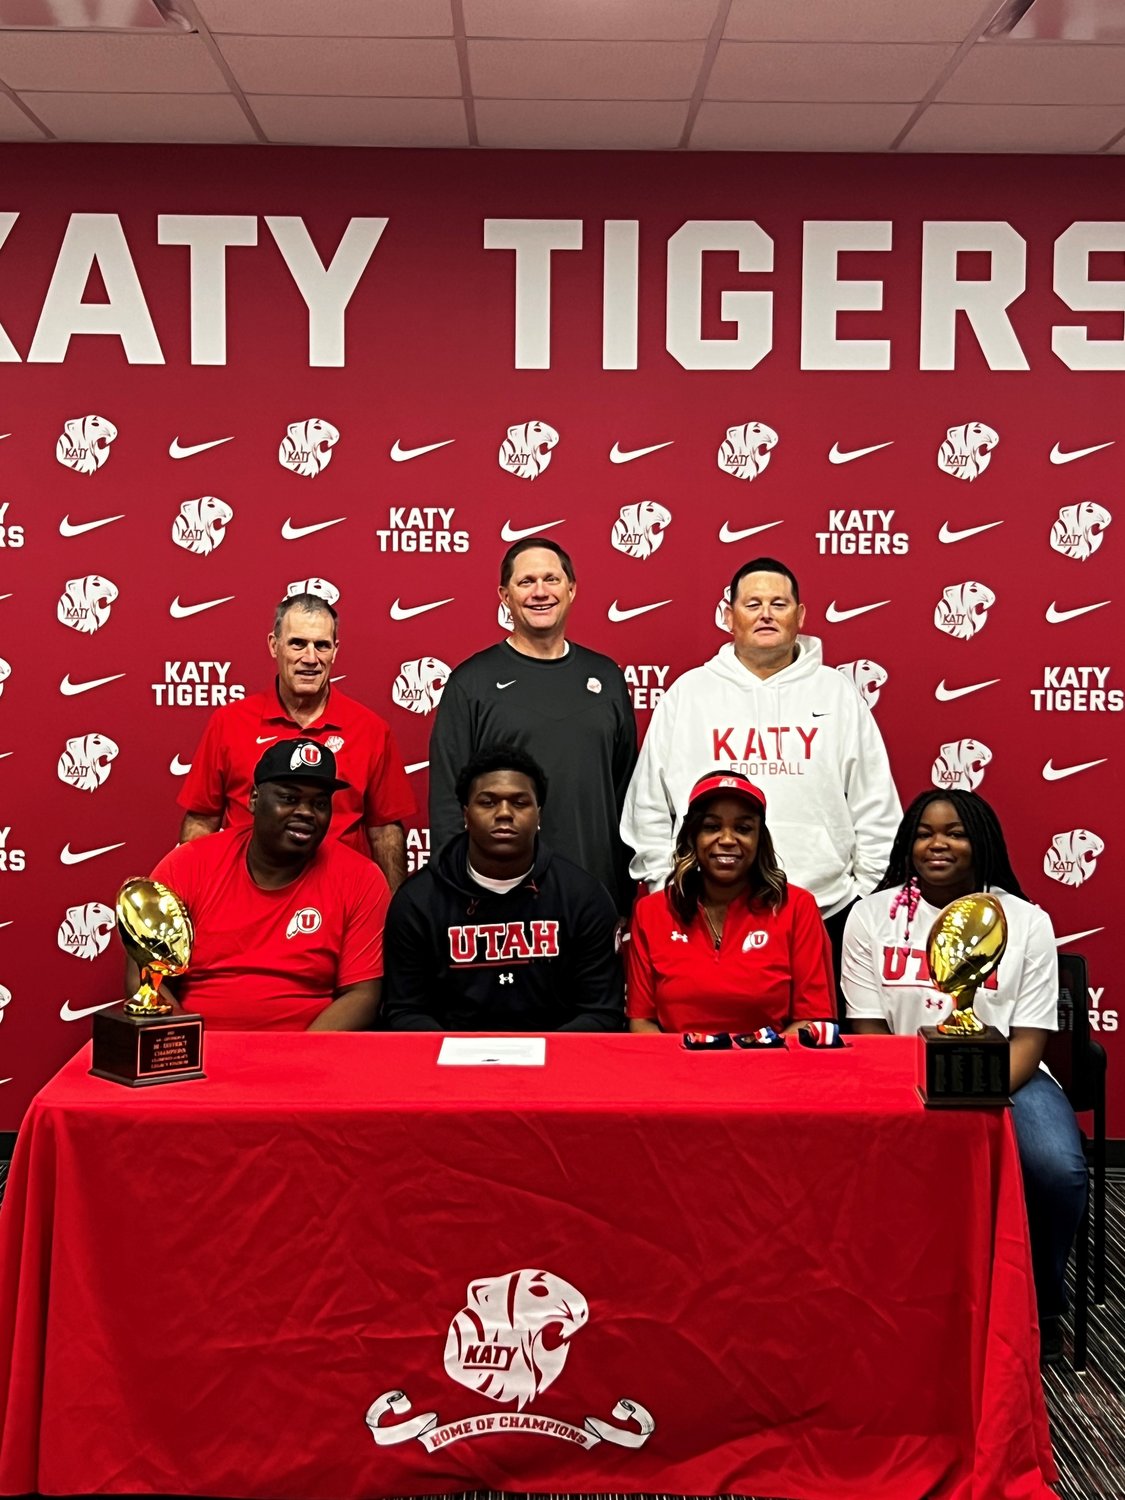 Johnathan Hall signed to play at the University of Utah over the winter signing period.